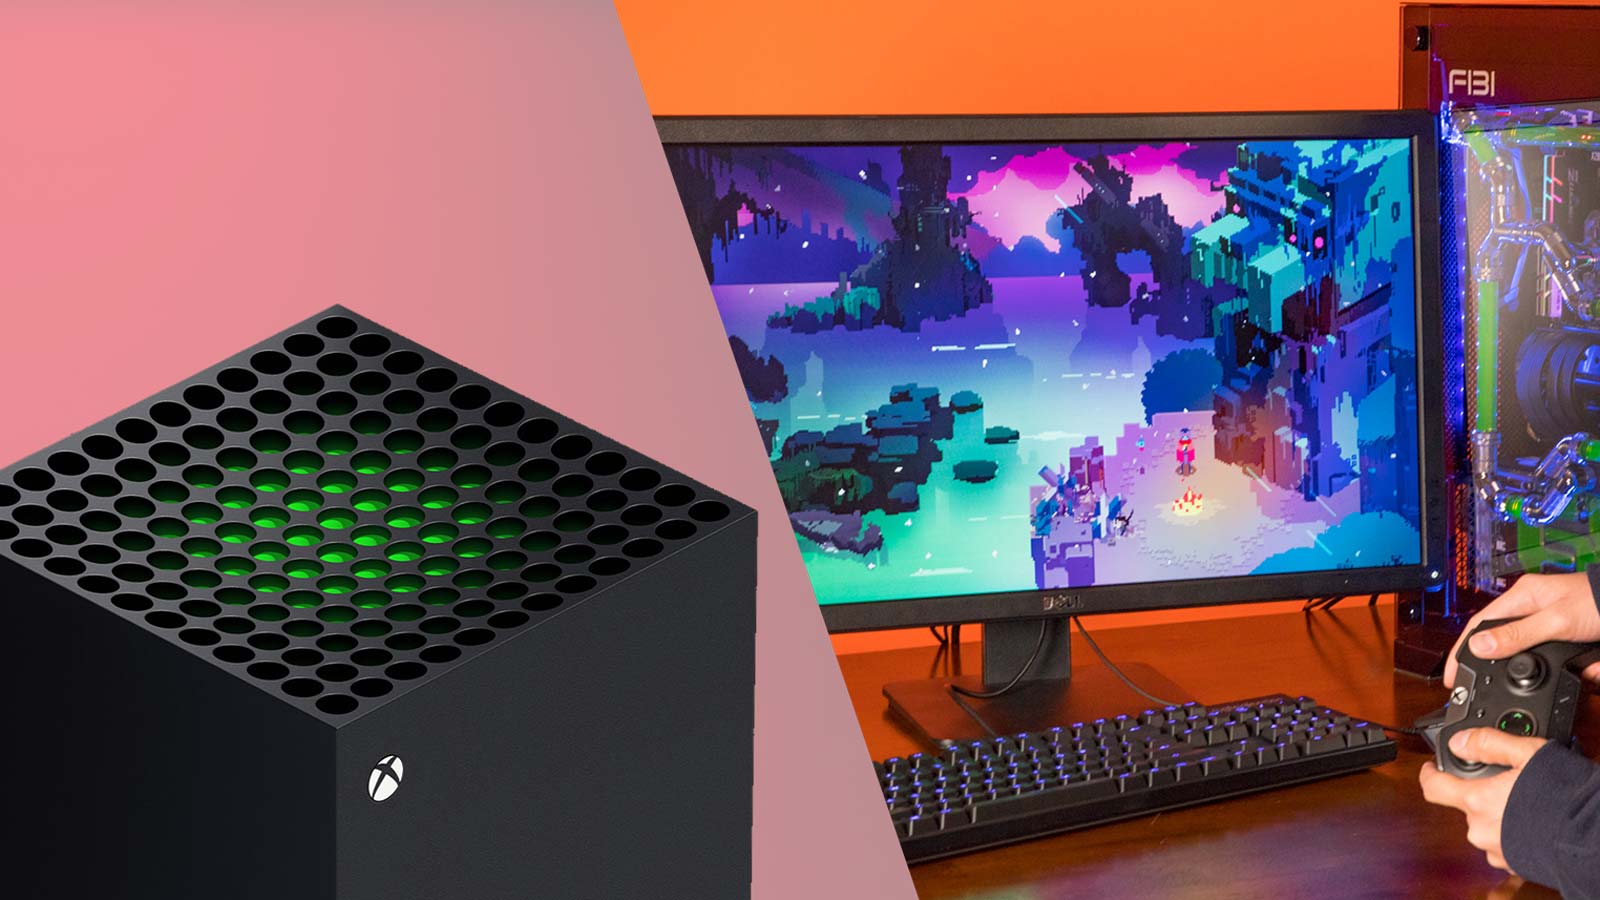 Can you build a PS5 or Xbox Series X PC for $800?